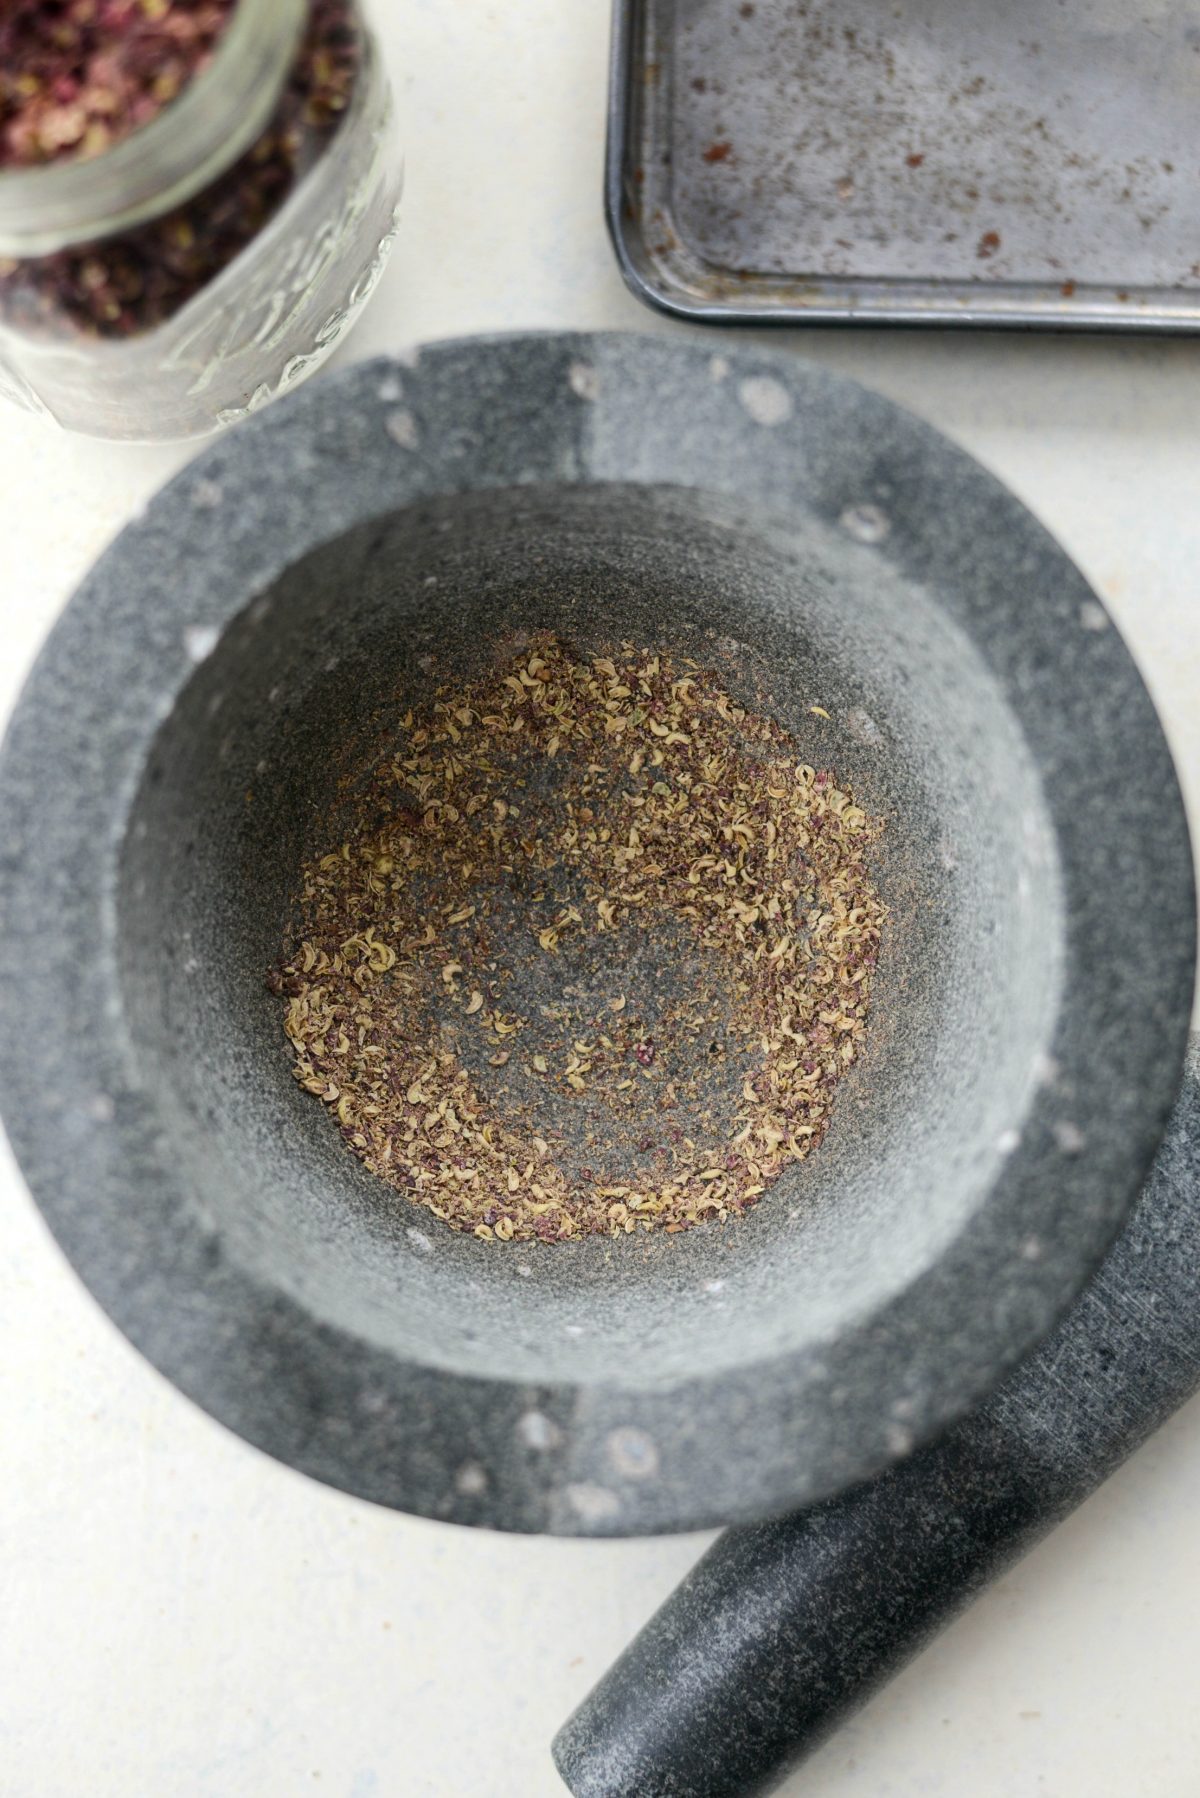 How To Prepare Szechuan Peppercorns l SimplyScratch.com #howto #prepare #szechuan #peppercorns #grind #spices #how #to